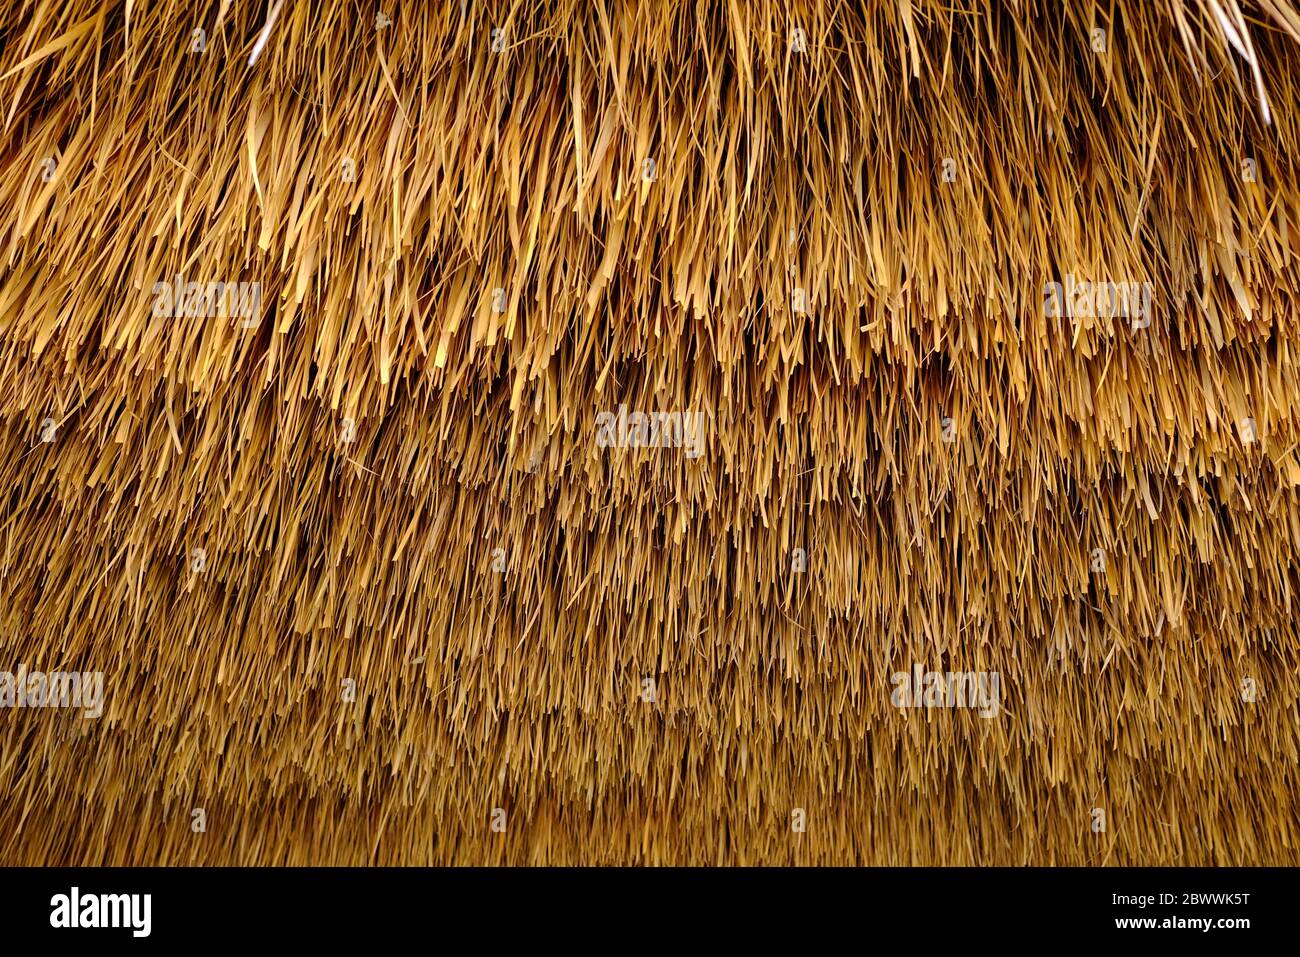 Straw Texture Roof Background. Stock Photo